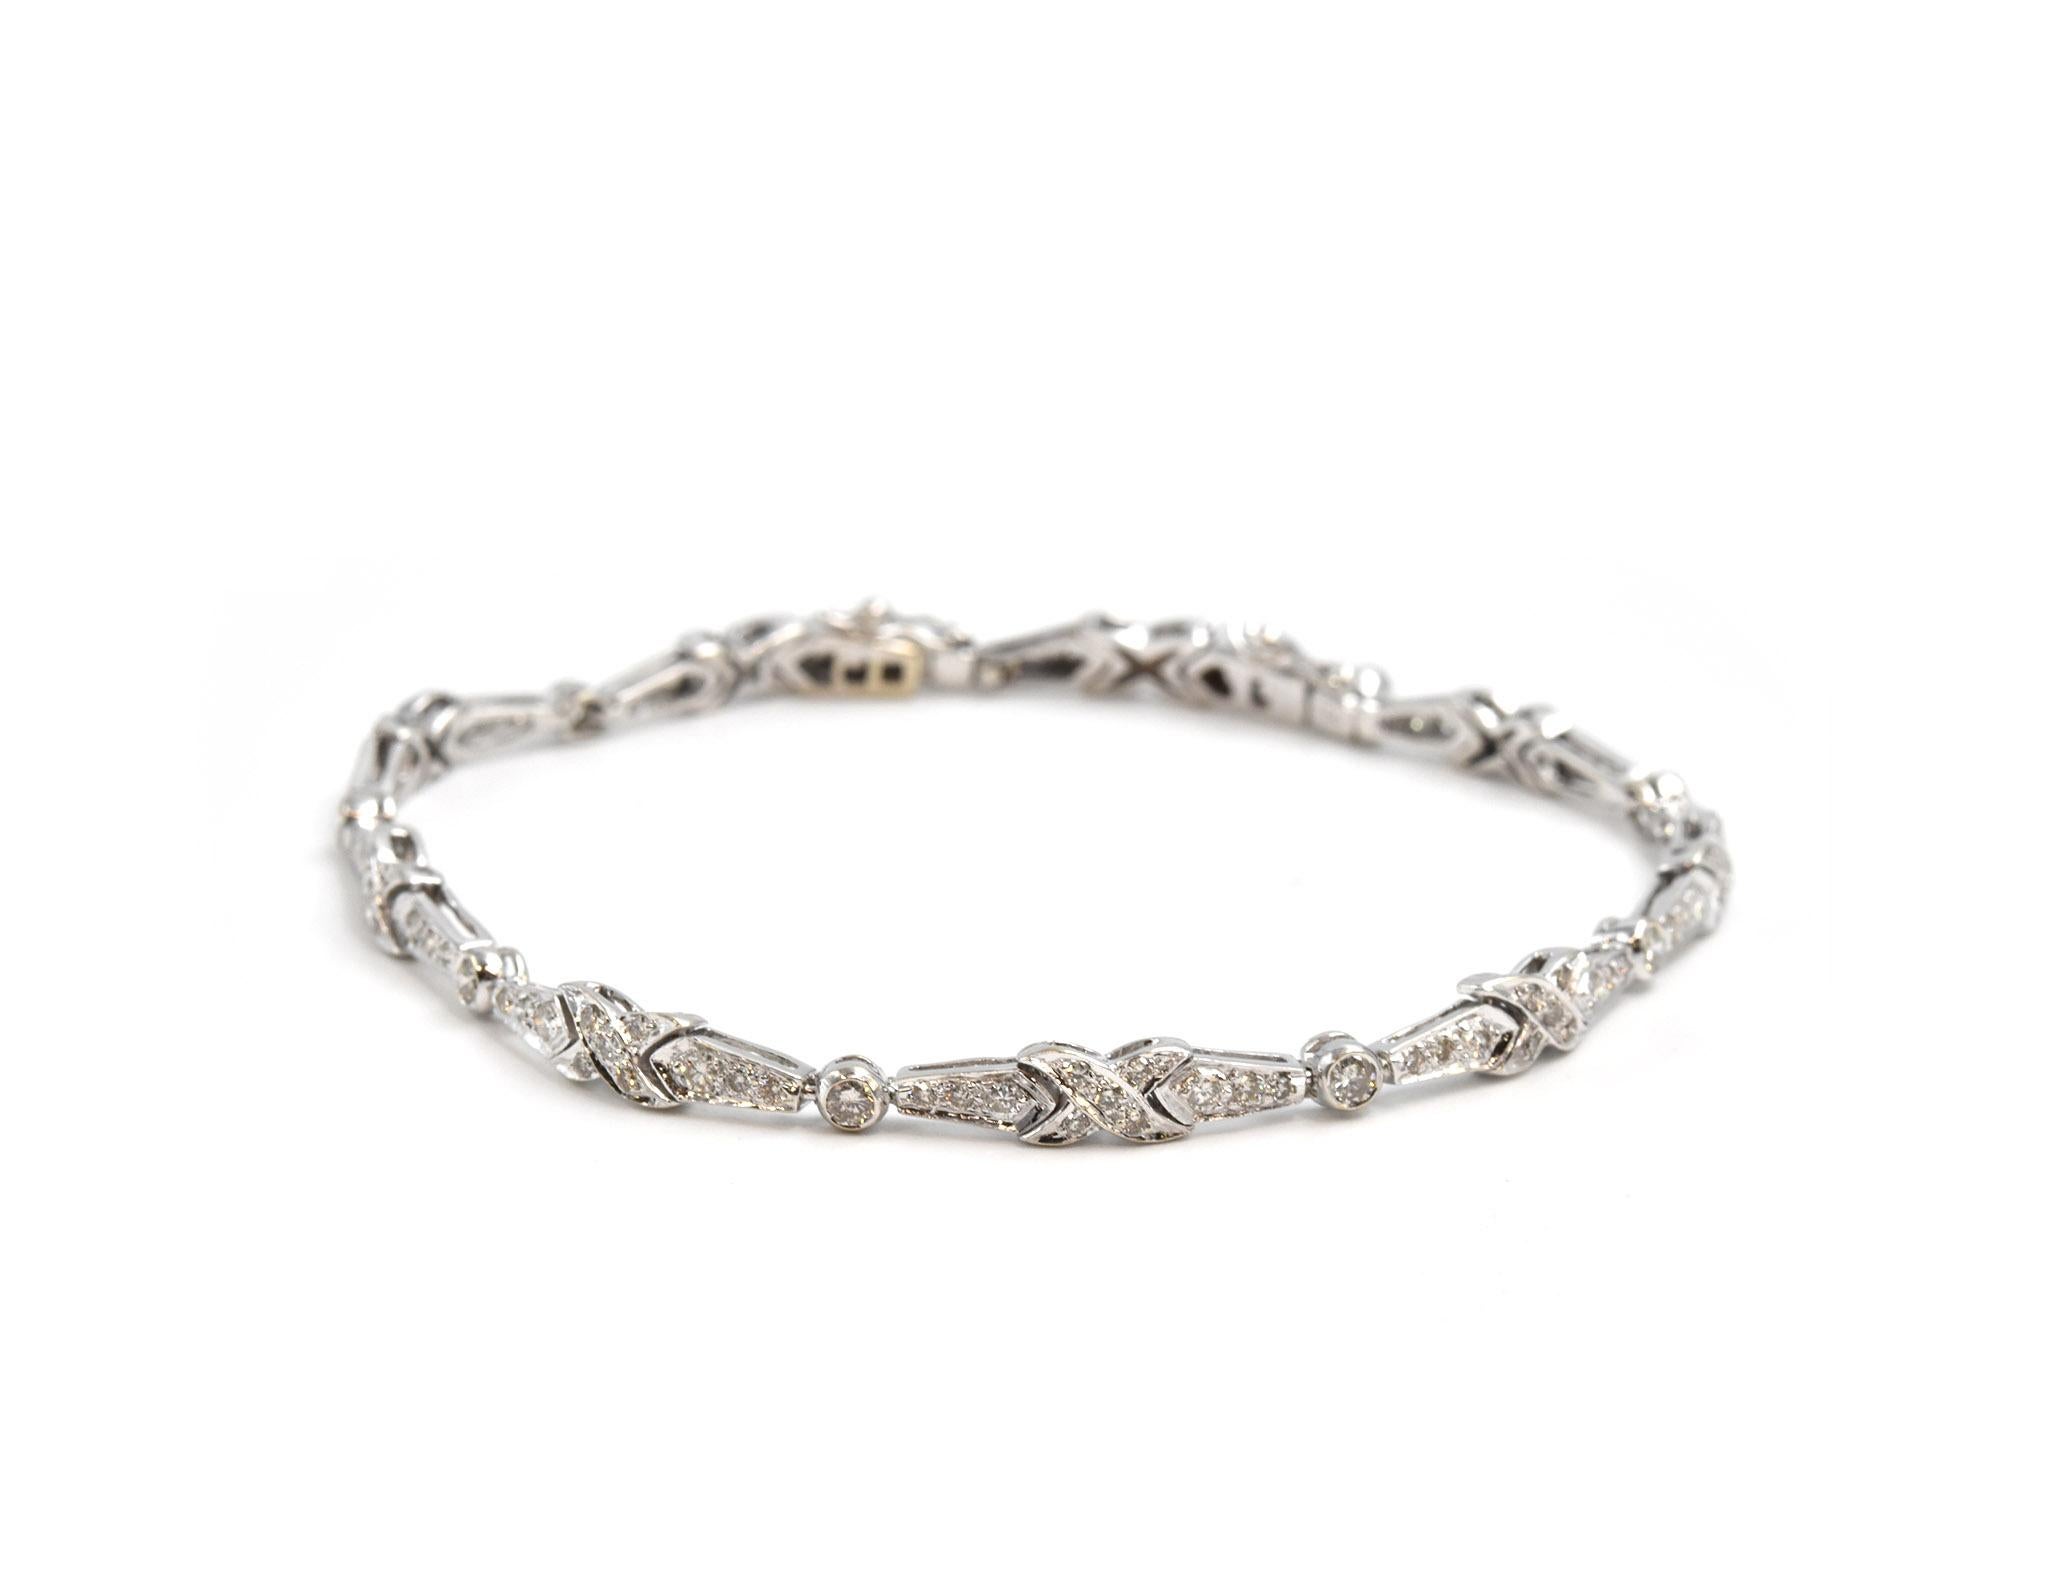 Designer: custom design
Material: 18k white gold
Diamonds: 137 round brilliant cut = 1.76 carat total weight
Color: H
Clarity: SI1
Dimensions: bracelet is 7 1/2-inch long
Weight: 11.32 grams
